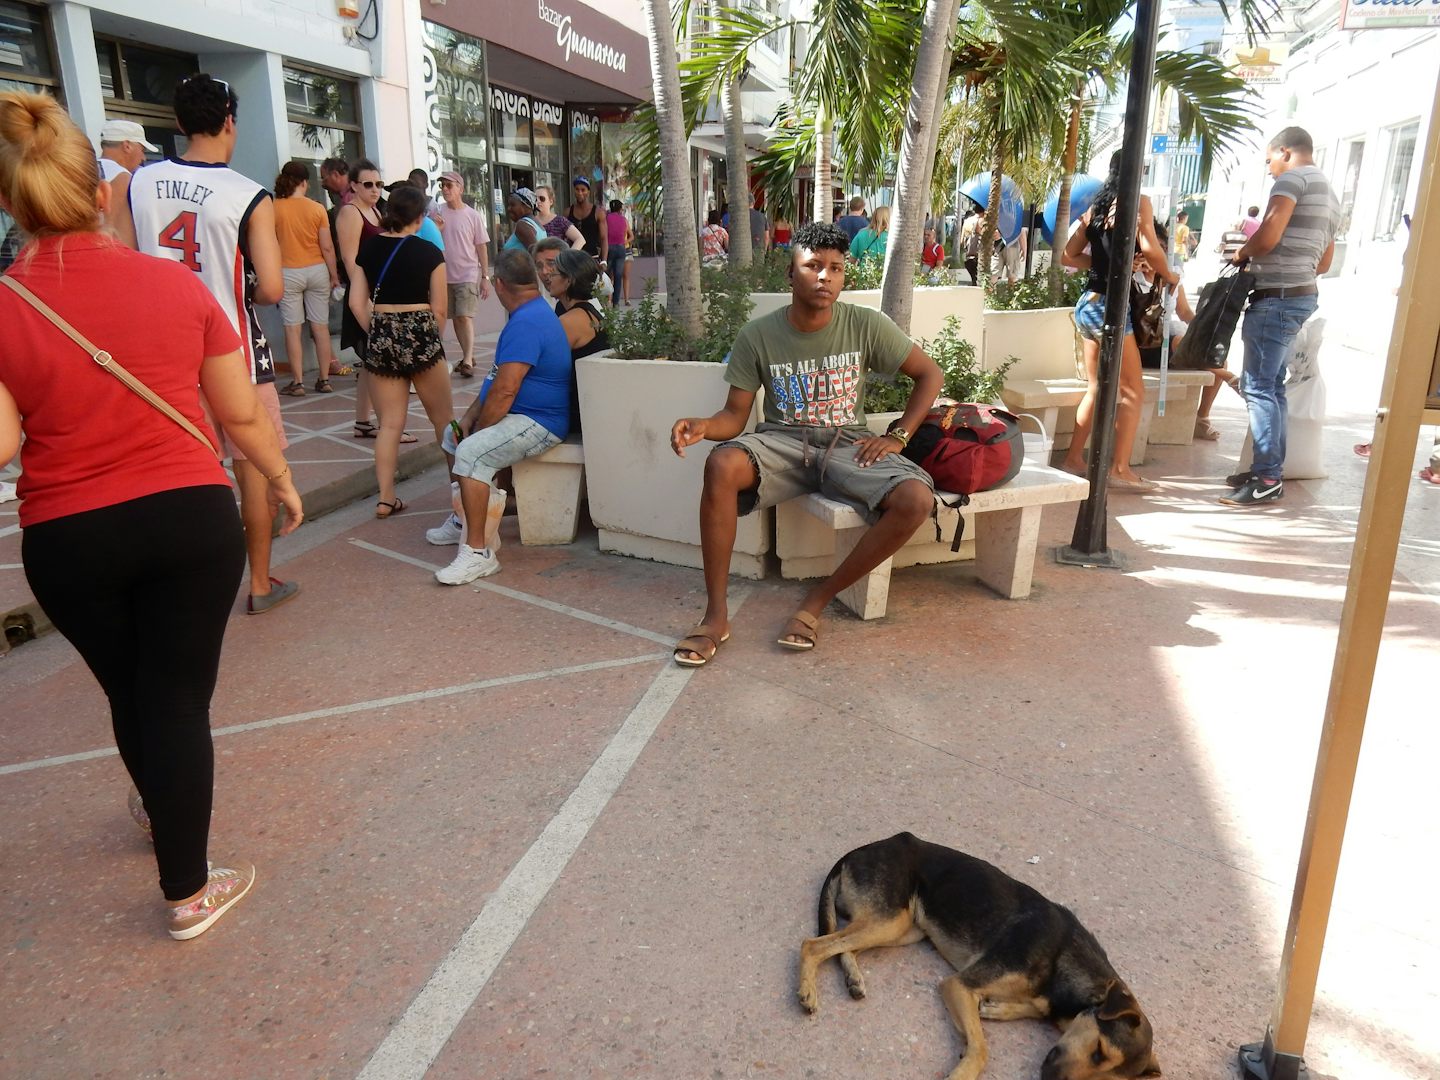 Cienfuegos pedestrian street. If you want to shop, you might prefer this to